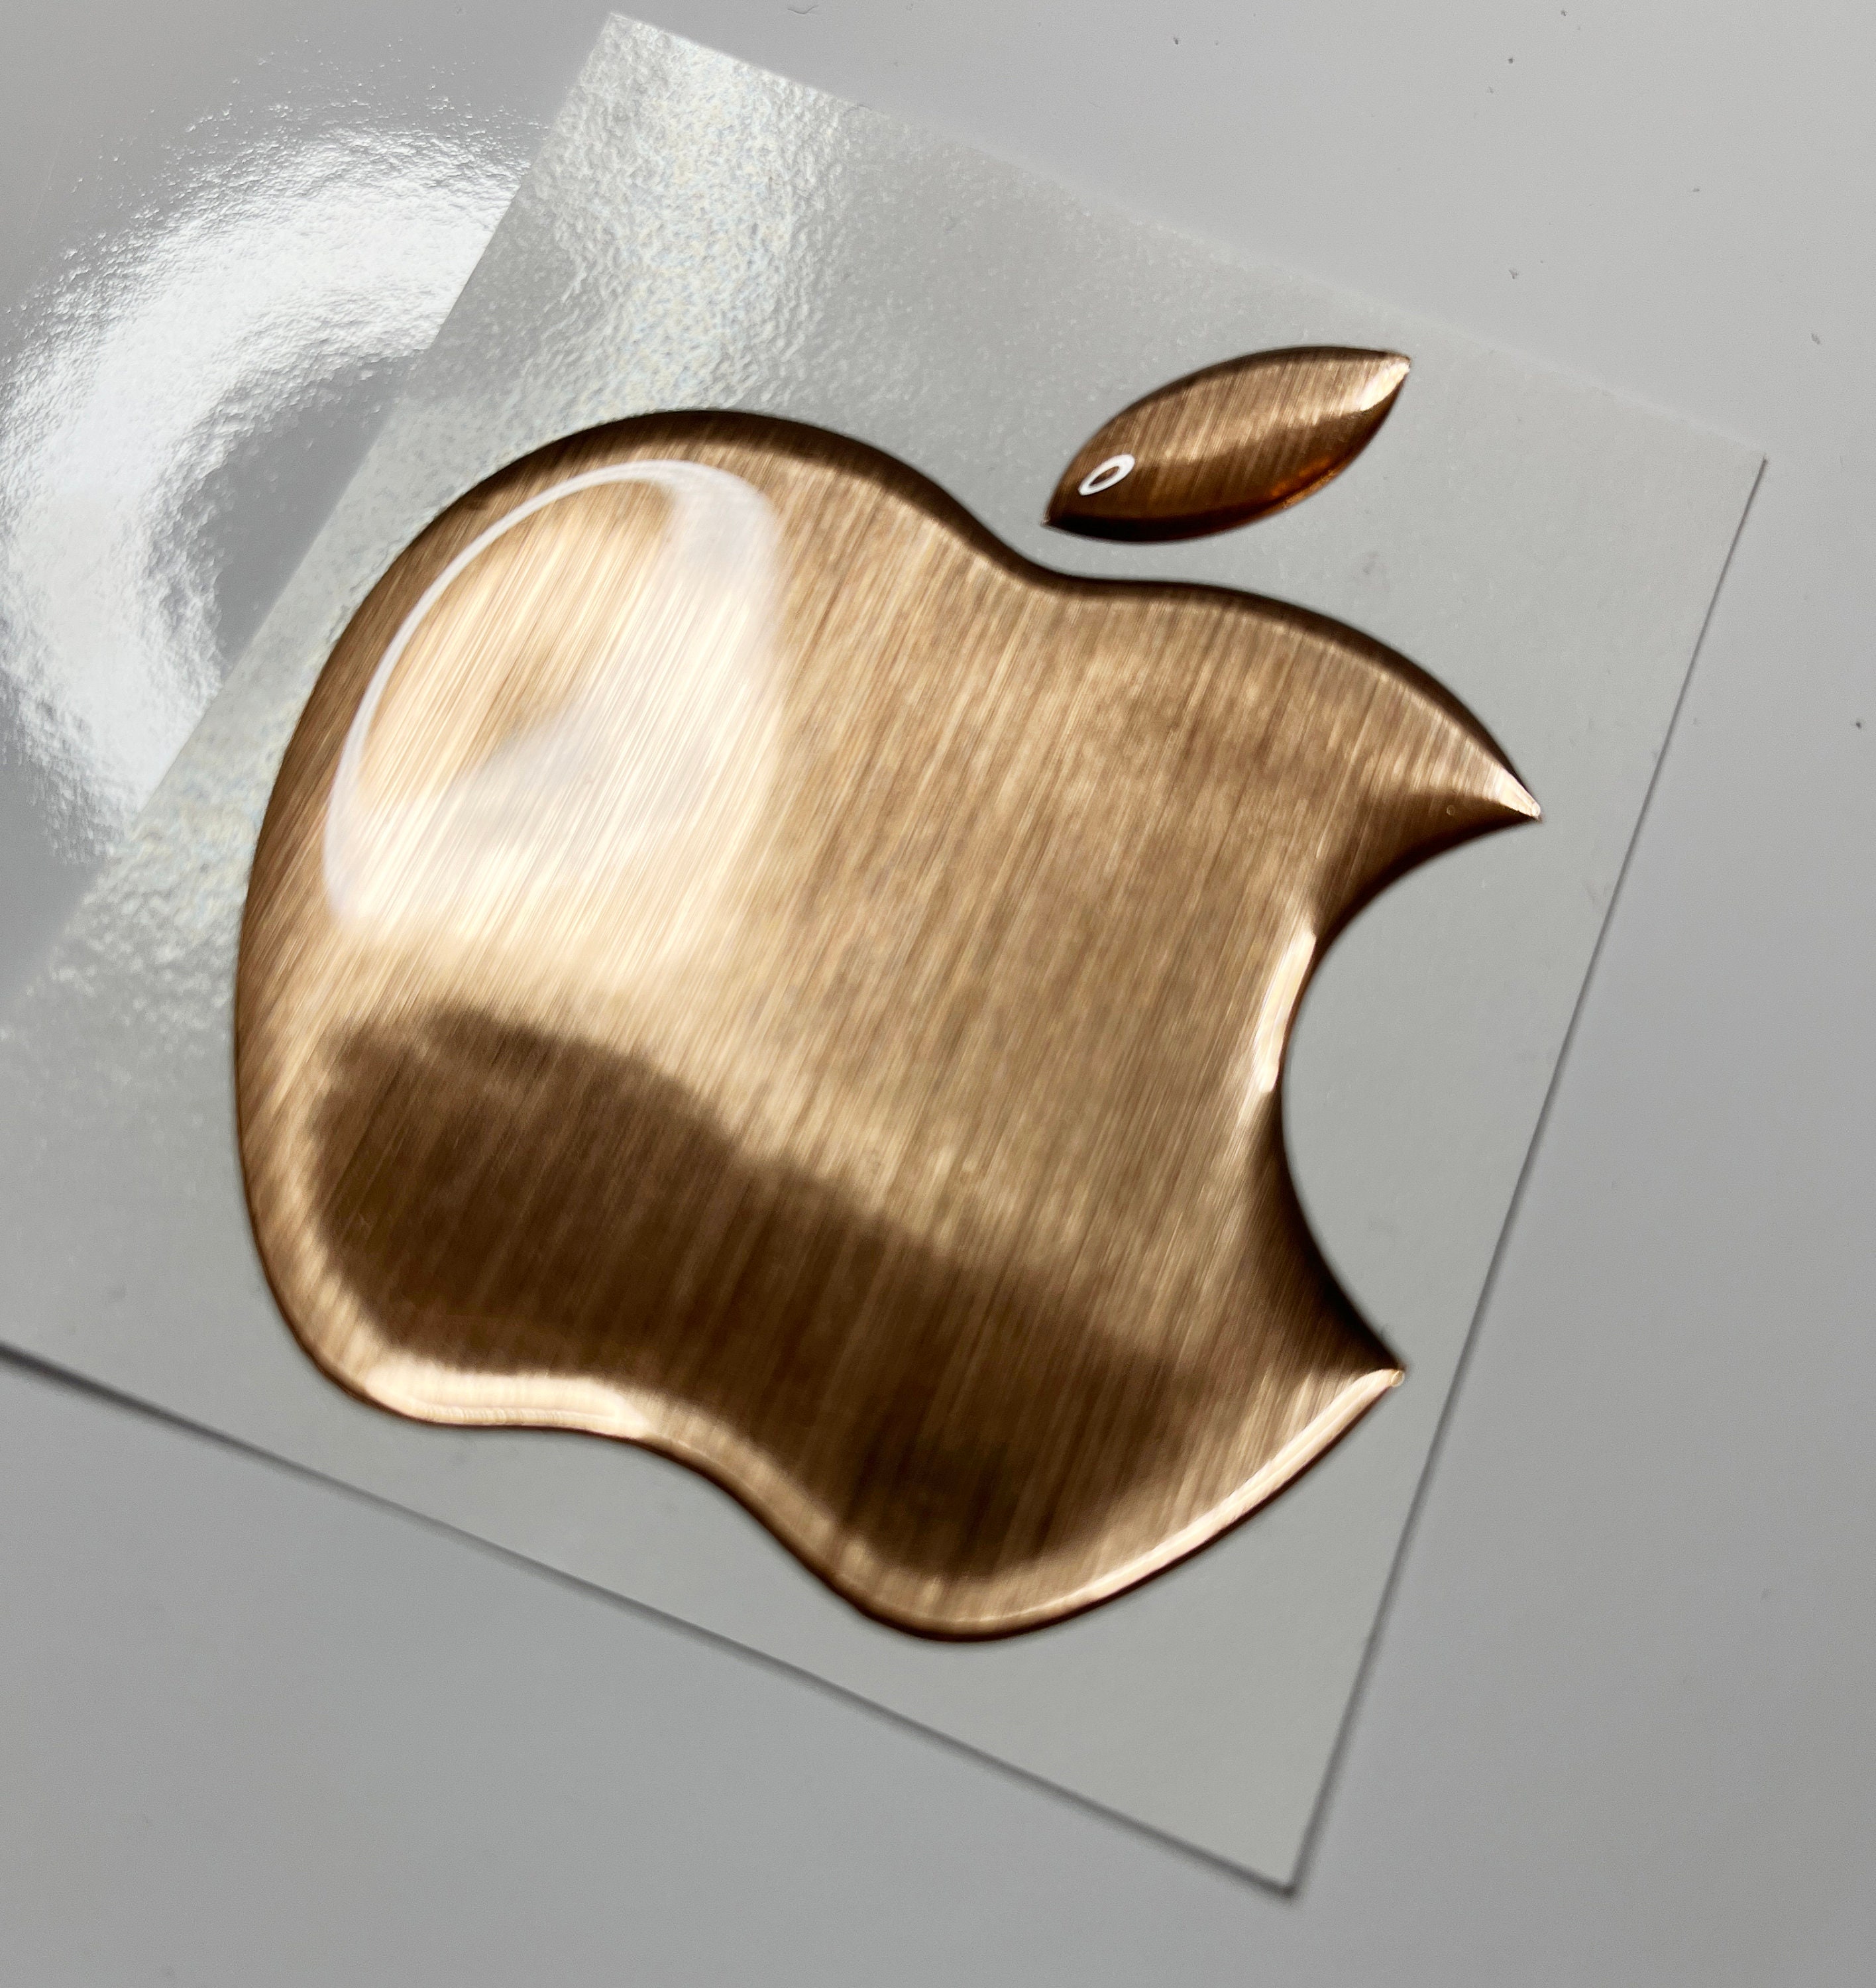 1pcs. 3D Mirror Domed Apple logo stickers for iPhone, iPad cover. Size  50x43 mm